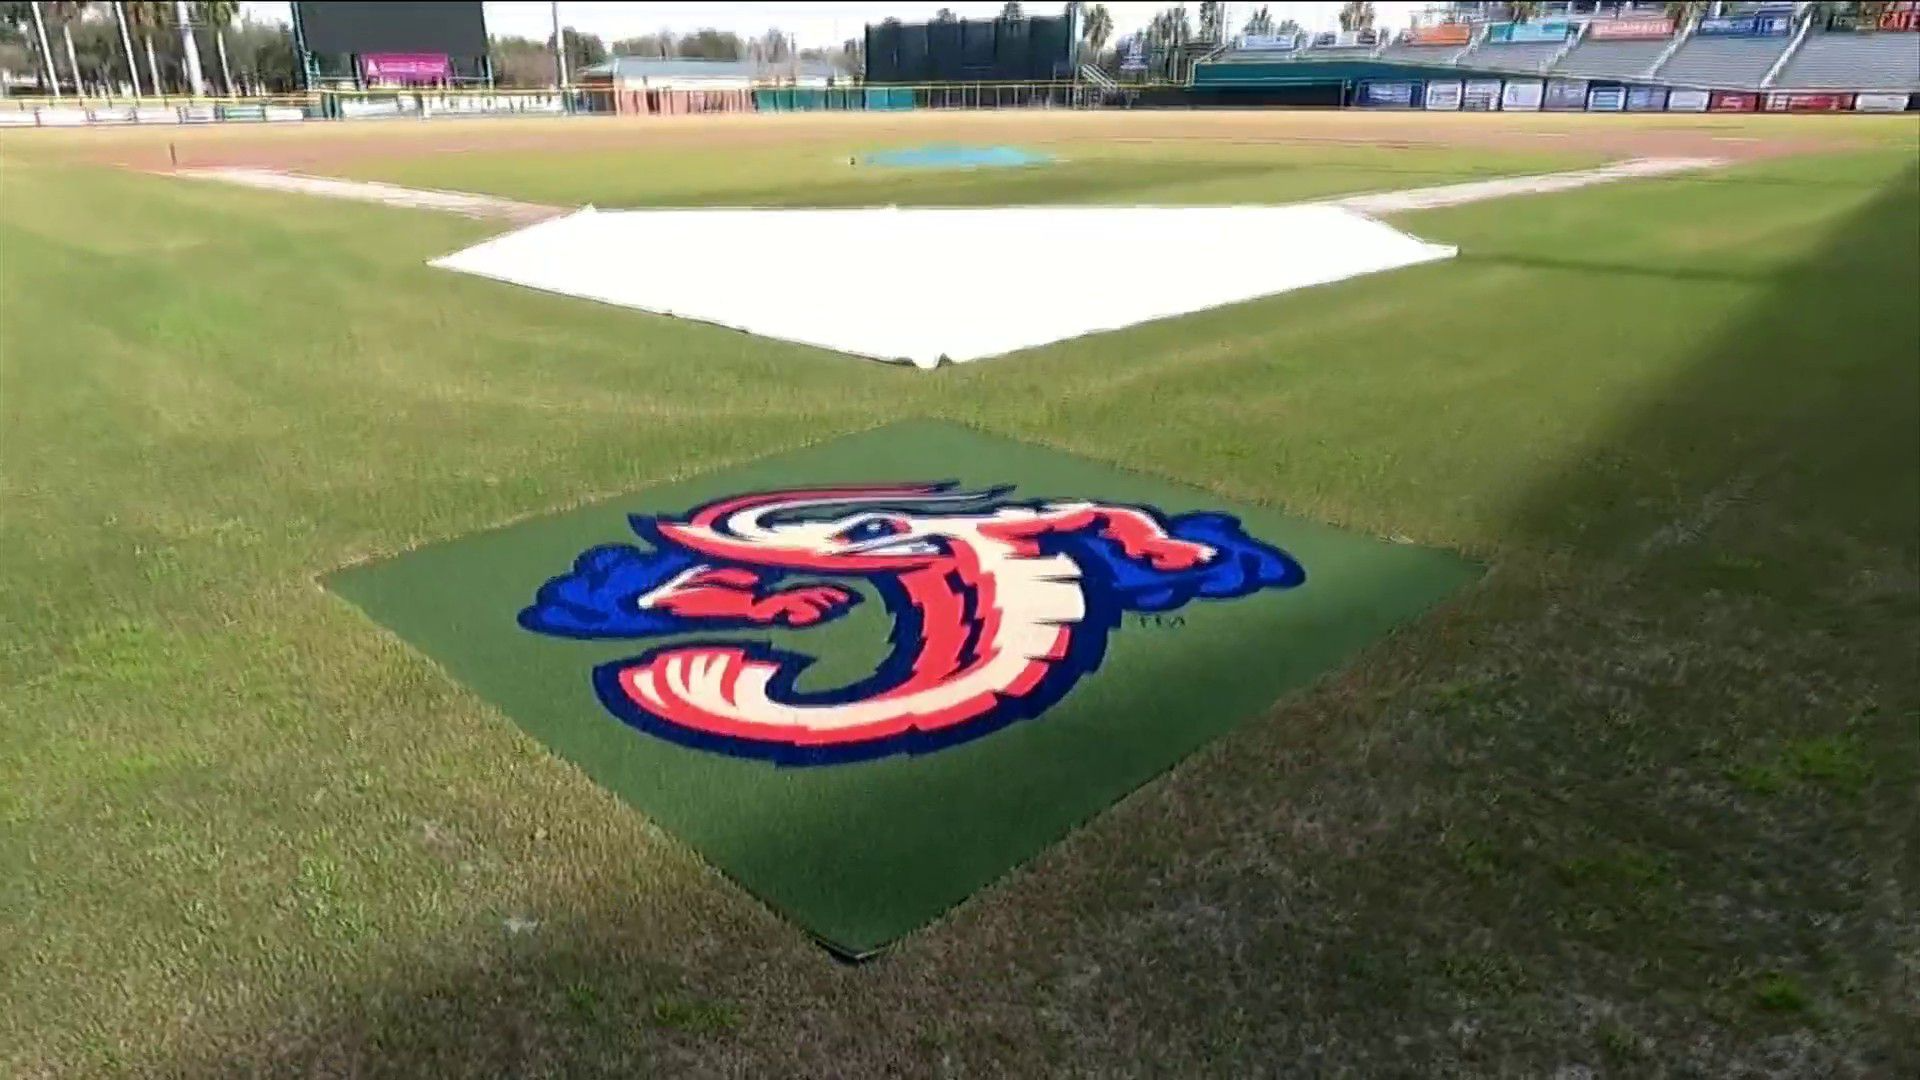 Energy' returning as Jumbo Shrimp ready for a normal Opening Day